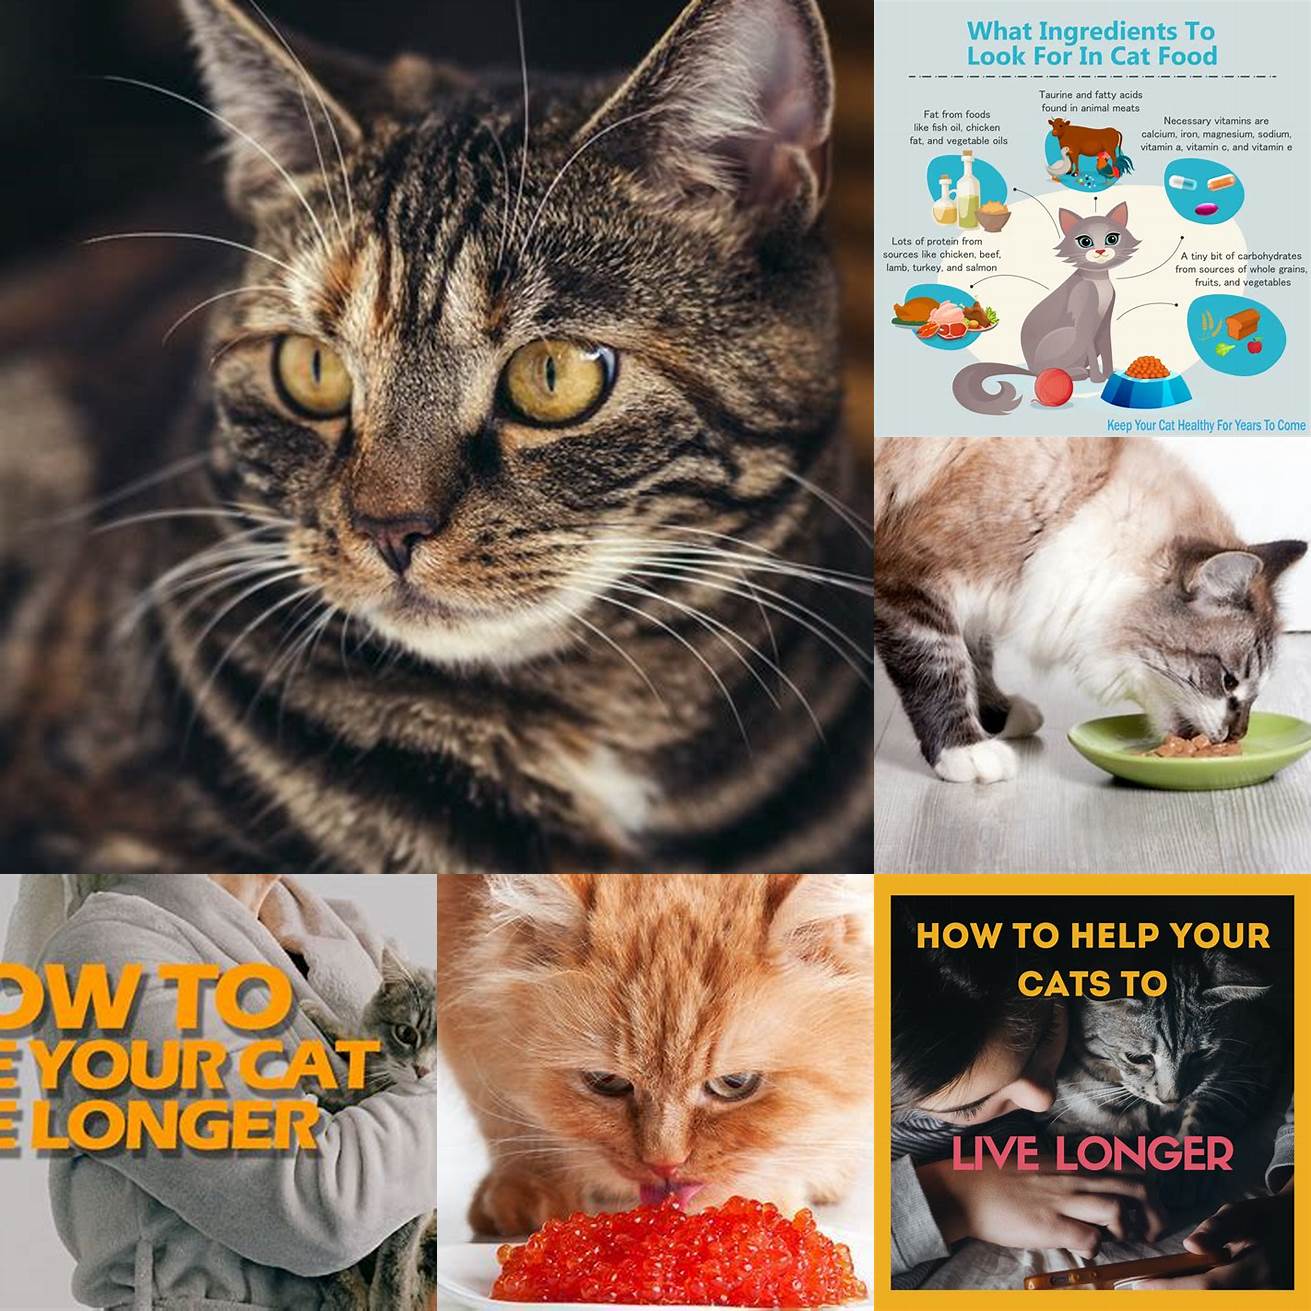 Diet A healthy diet can help your cat live a longer and healthier life